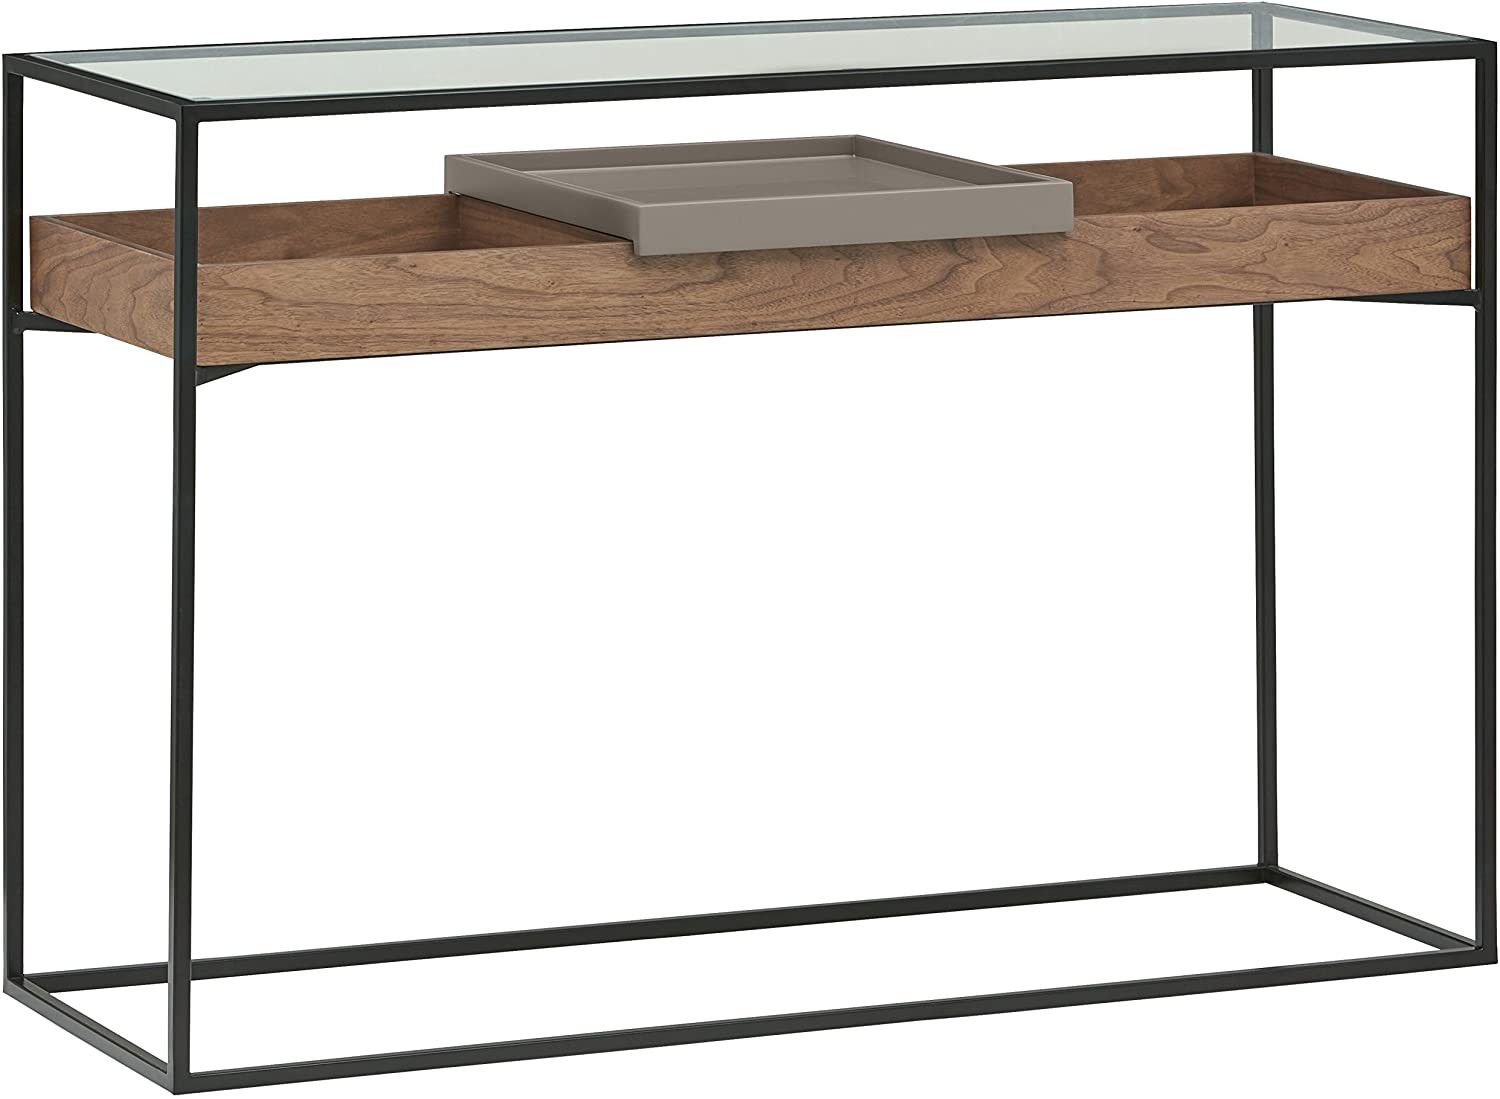 Modern Industrial Cabinet Table with Storage, Walnut